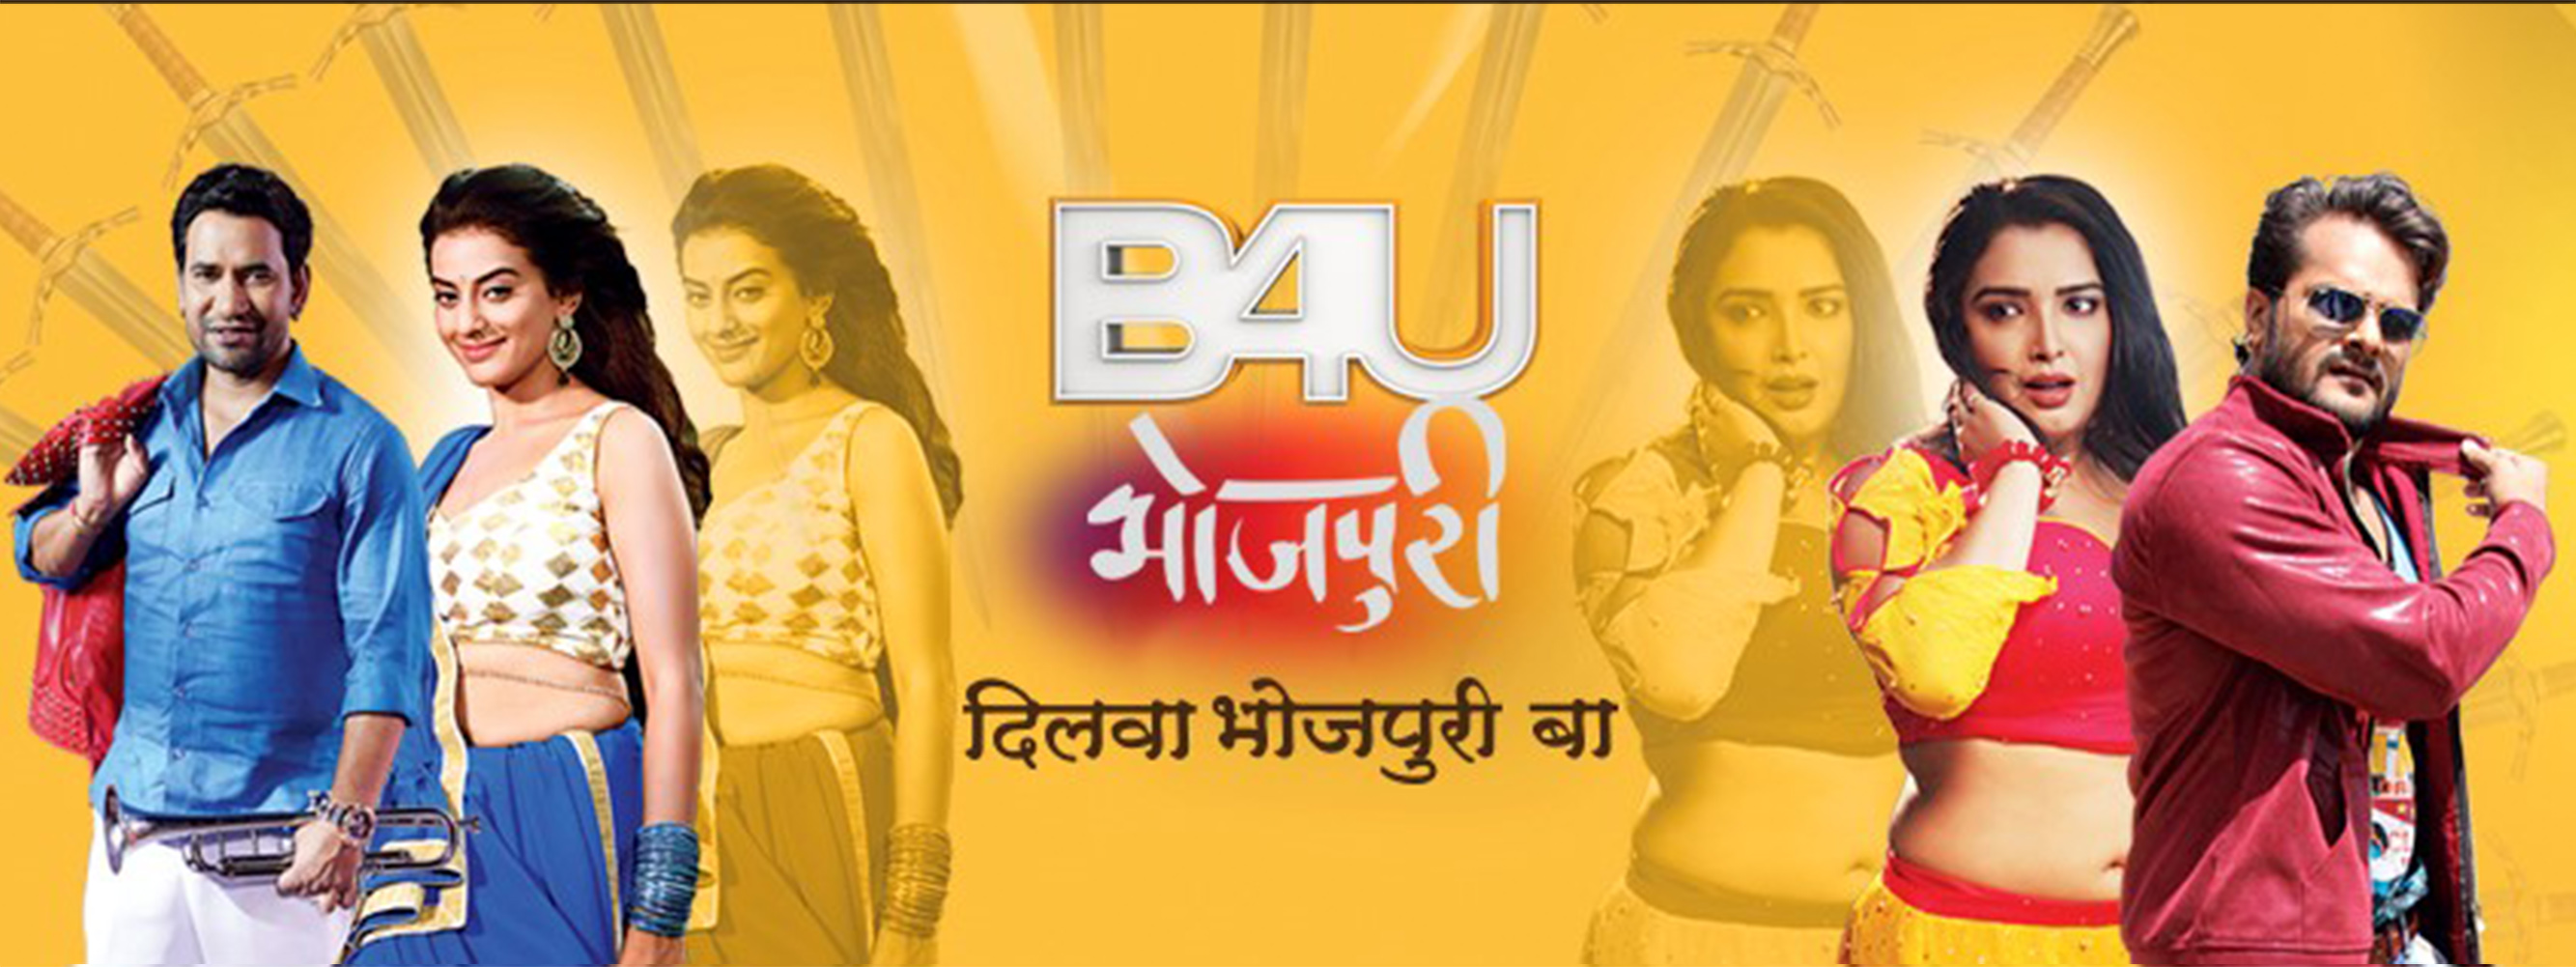 This September get ready to watch action packed blockbusters only on B4u Bhojpuri